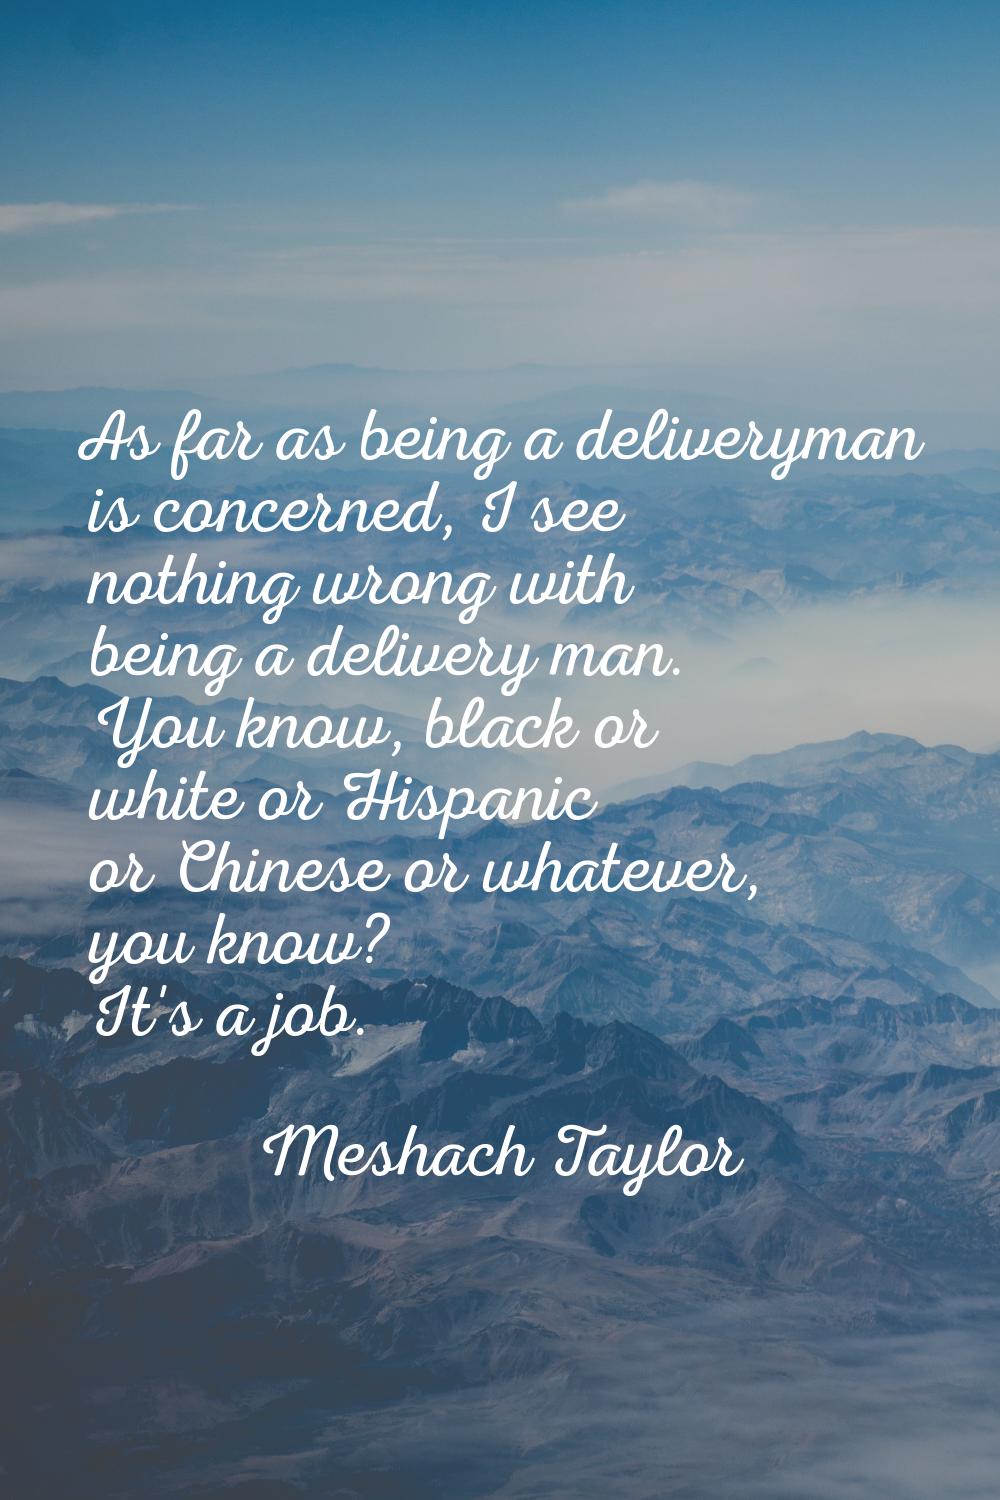 As far as being a deliveryman is concerned, I see nothing wrong with being a delivery man. You know